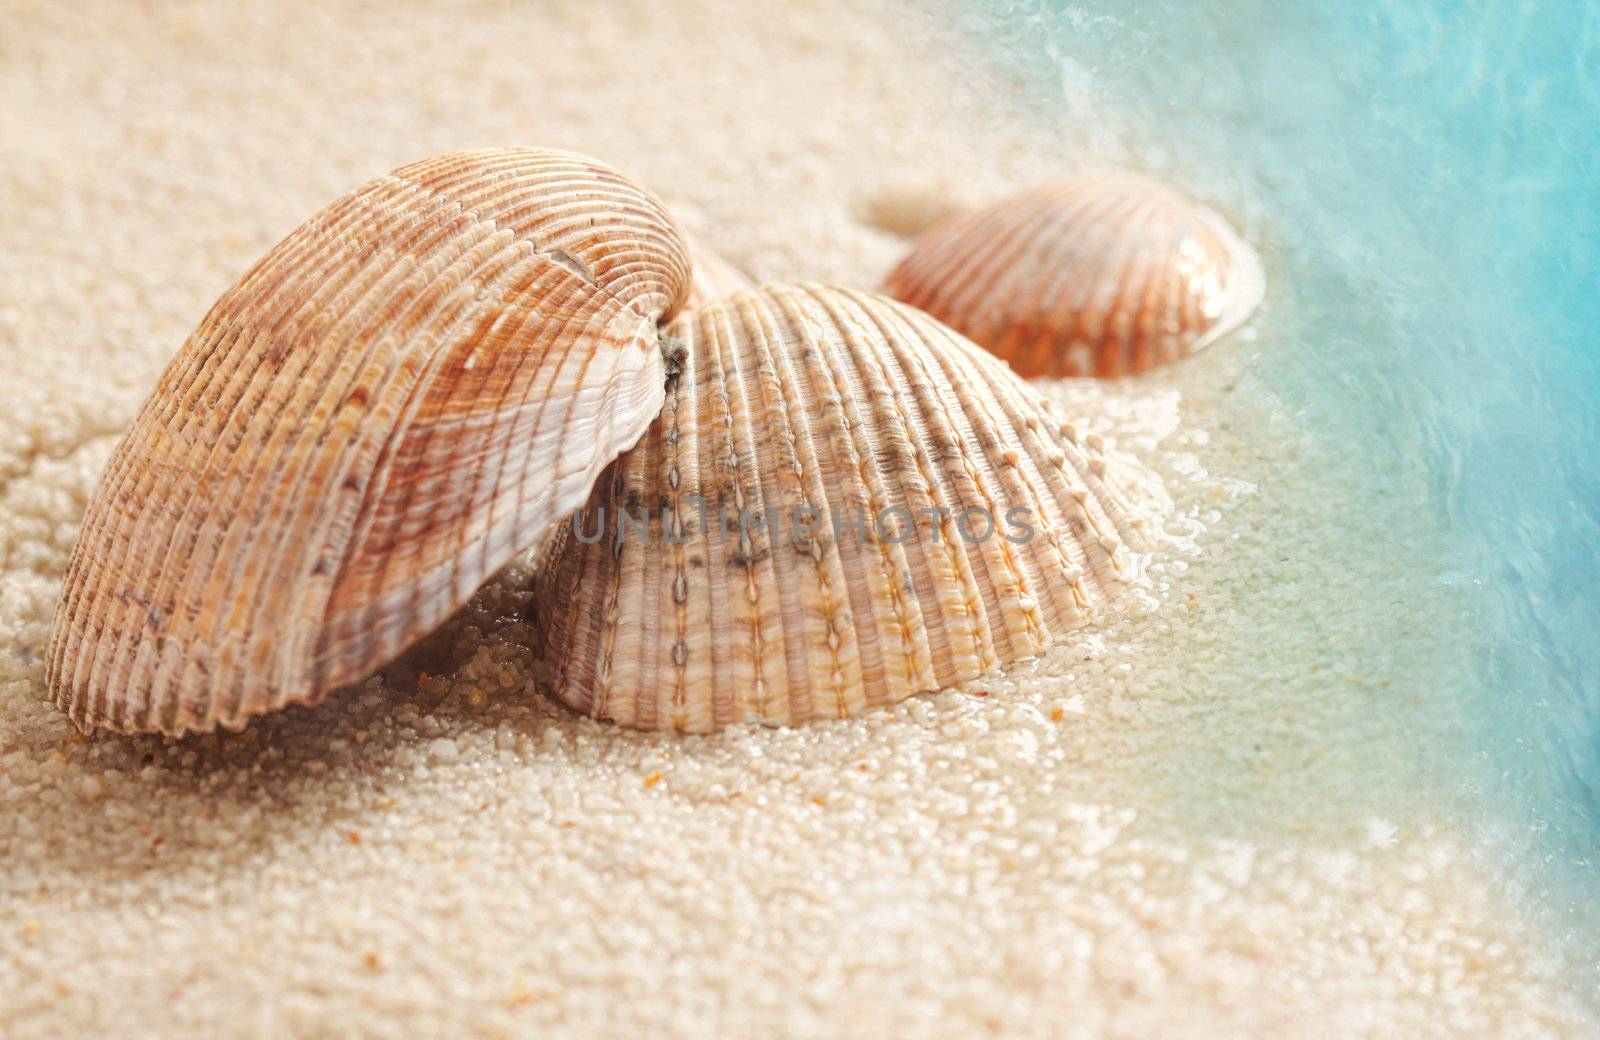 Seashells in the wet sand by Sandralise